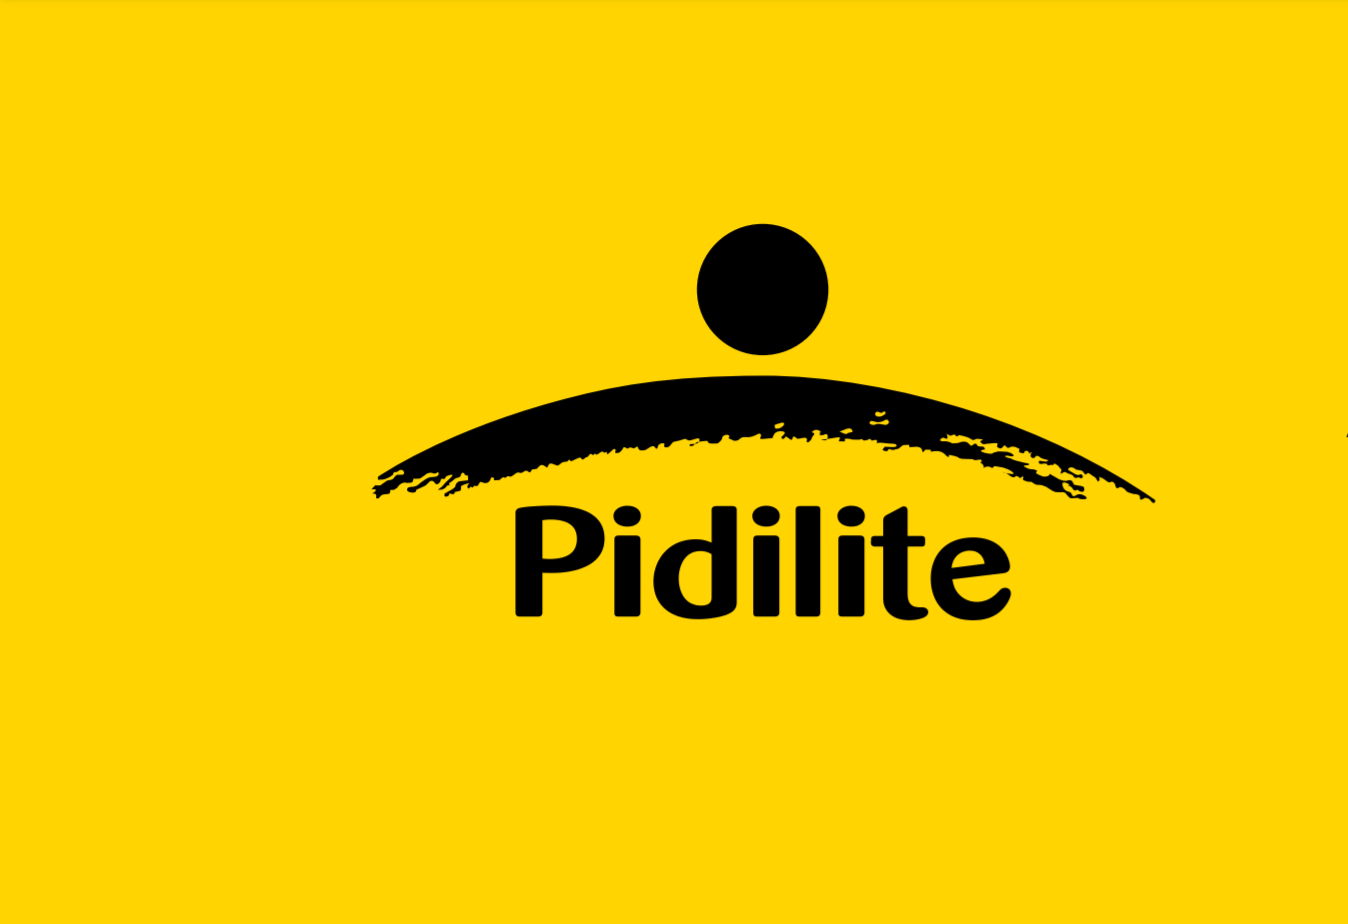 pidilite industries ltd products | subsidiaries - indiancompanies.in